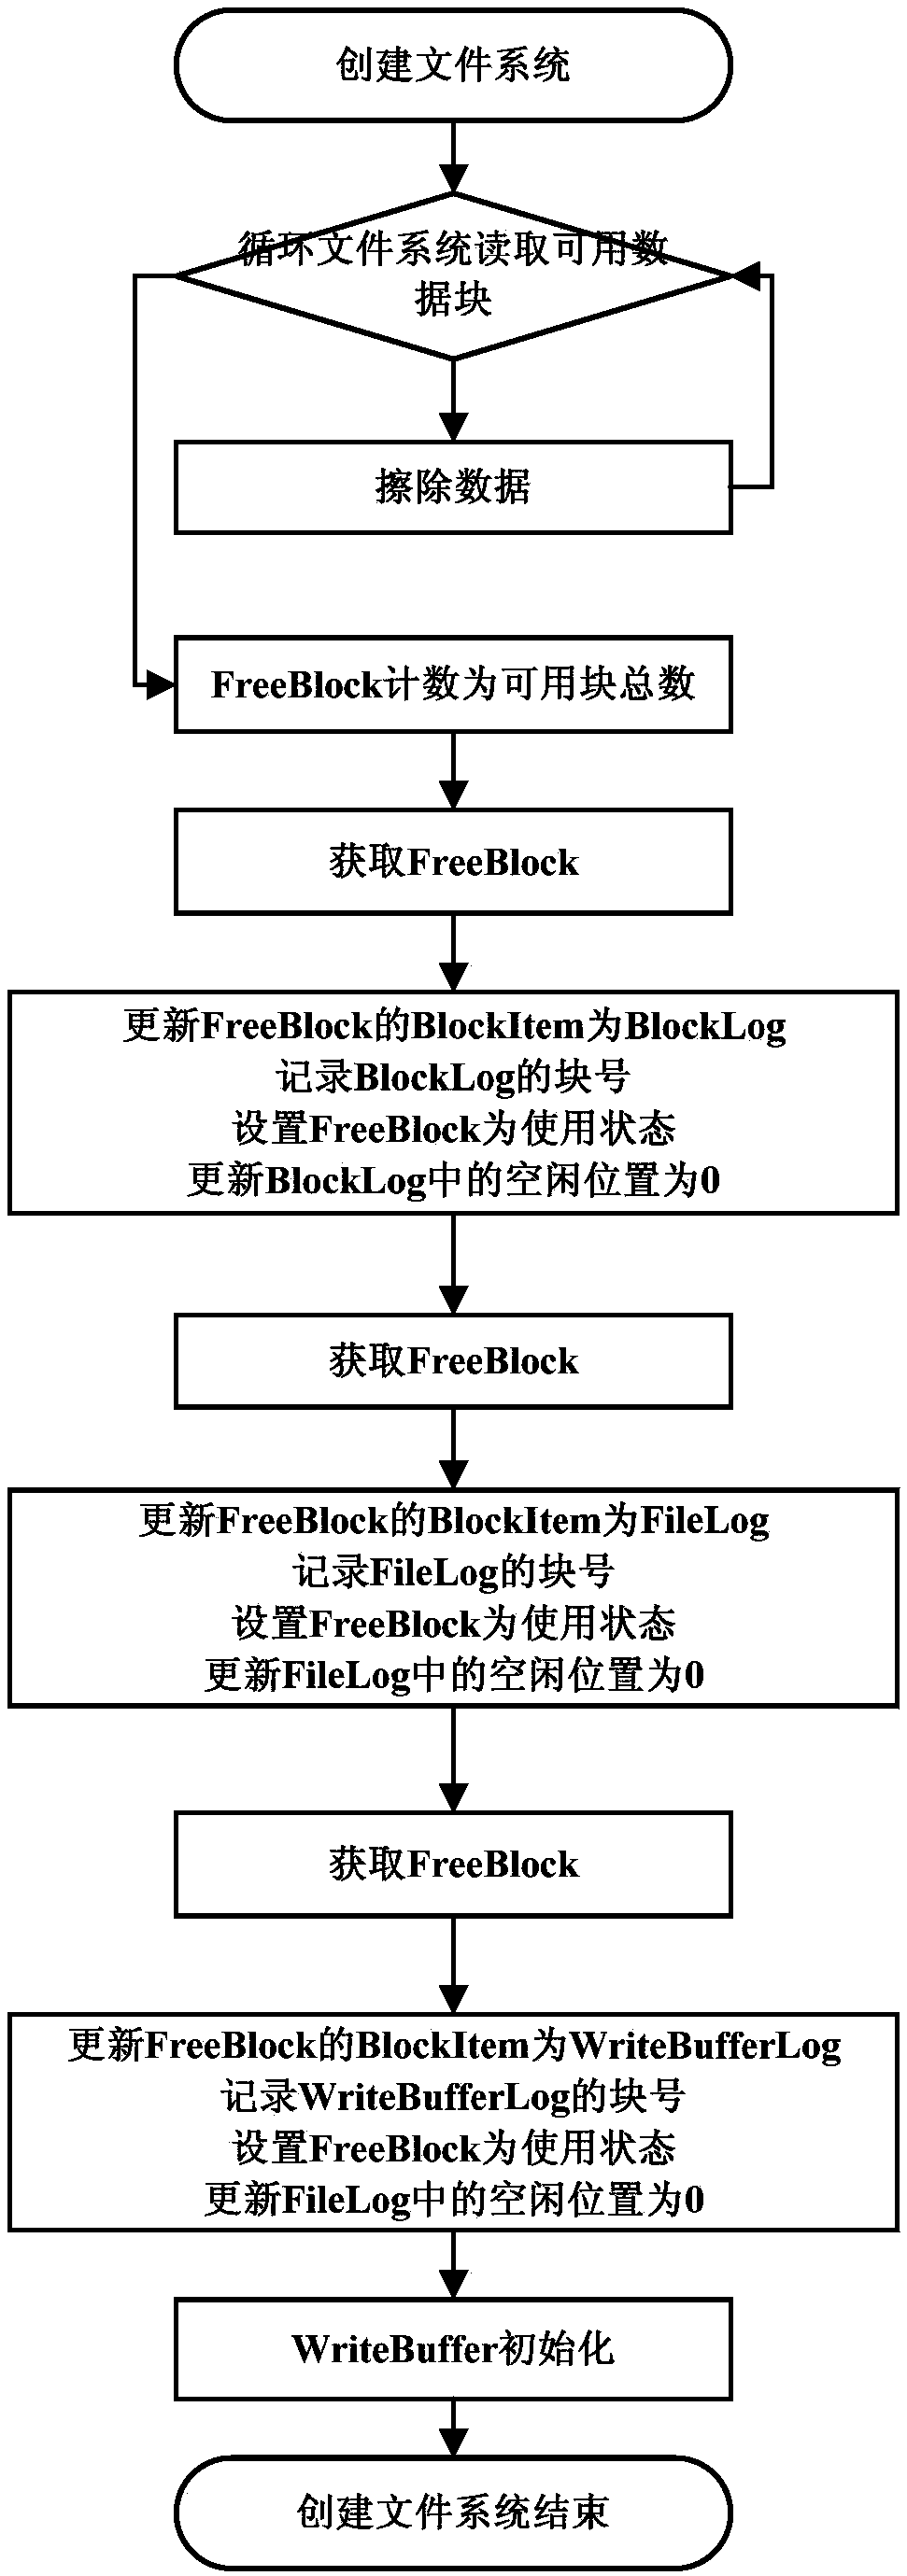 A realization method for a lightweight file system